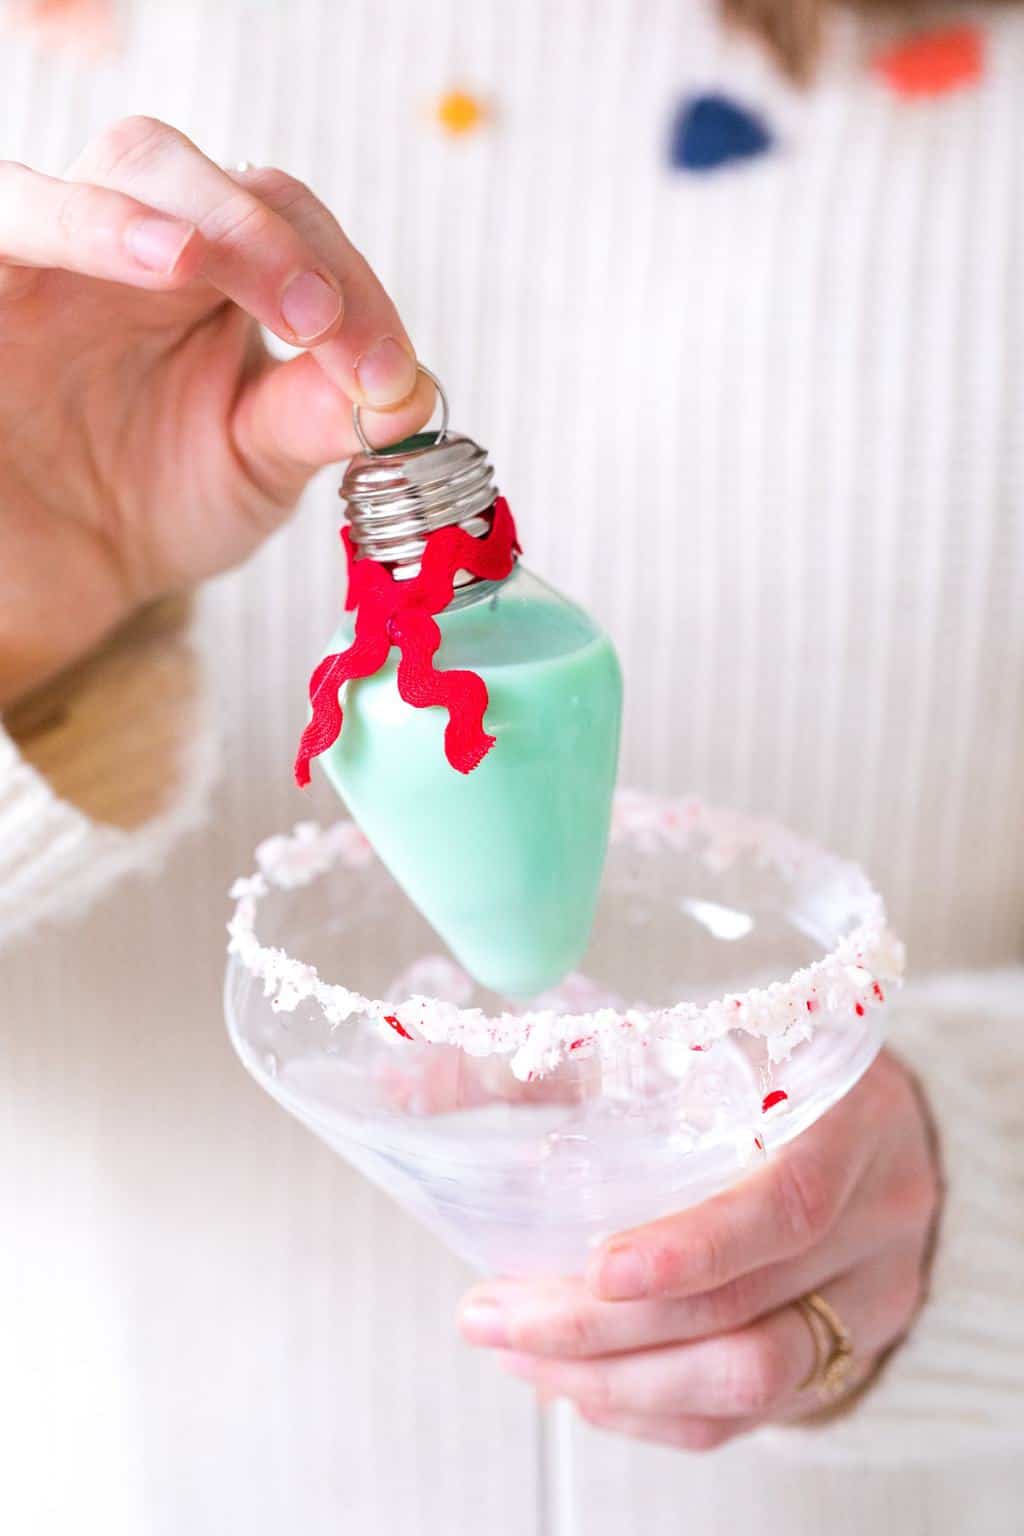 serving up rumchata holiday ornaments! Pour your own ornament holiday cocktail! How to Make an Easy Christmas Cocktail Ornament by top Houston lifestyle blogger Ashley Rose of Sugar & Cloth #christmas #cocktail #easy #ideas #holidays #winter #ornament #decor #recipe